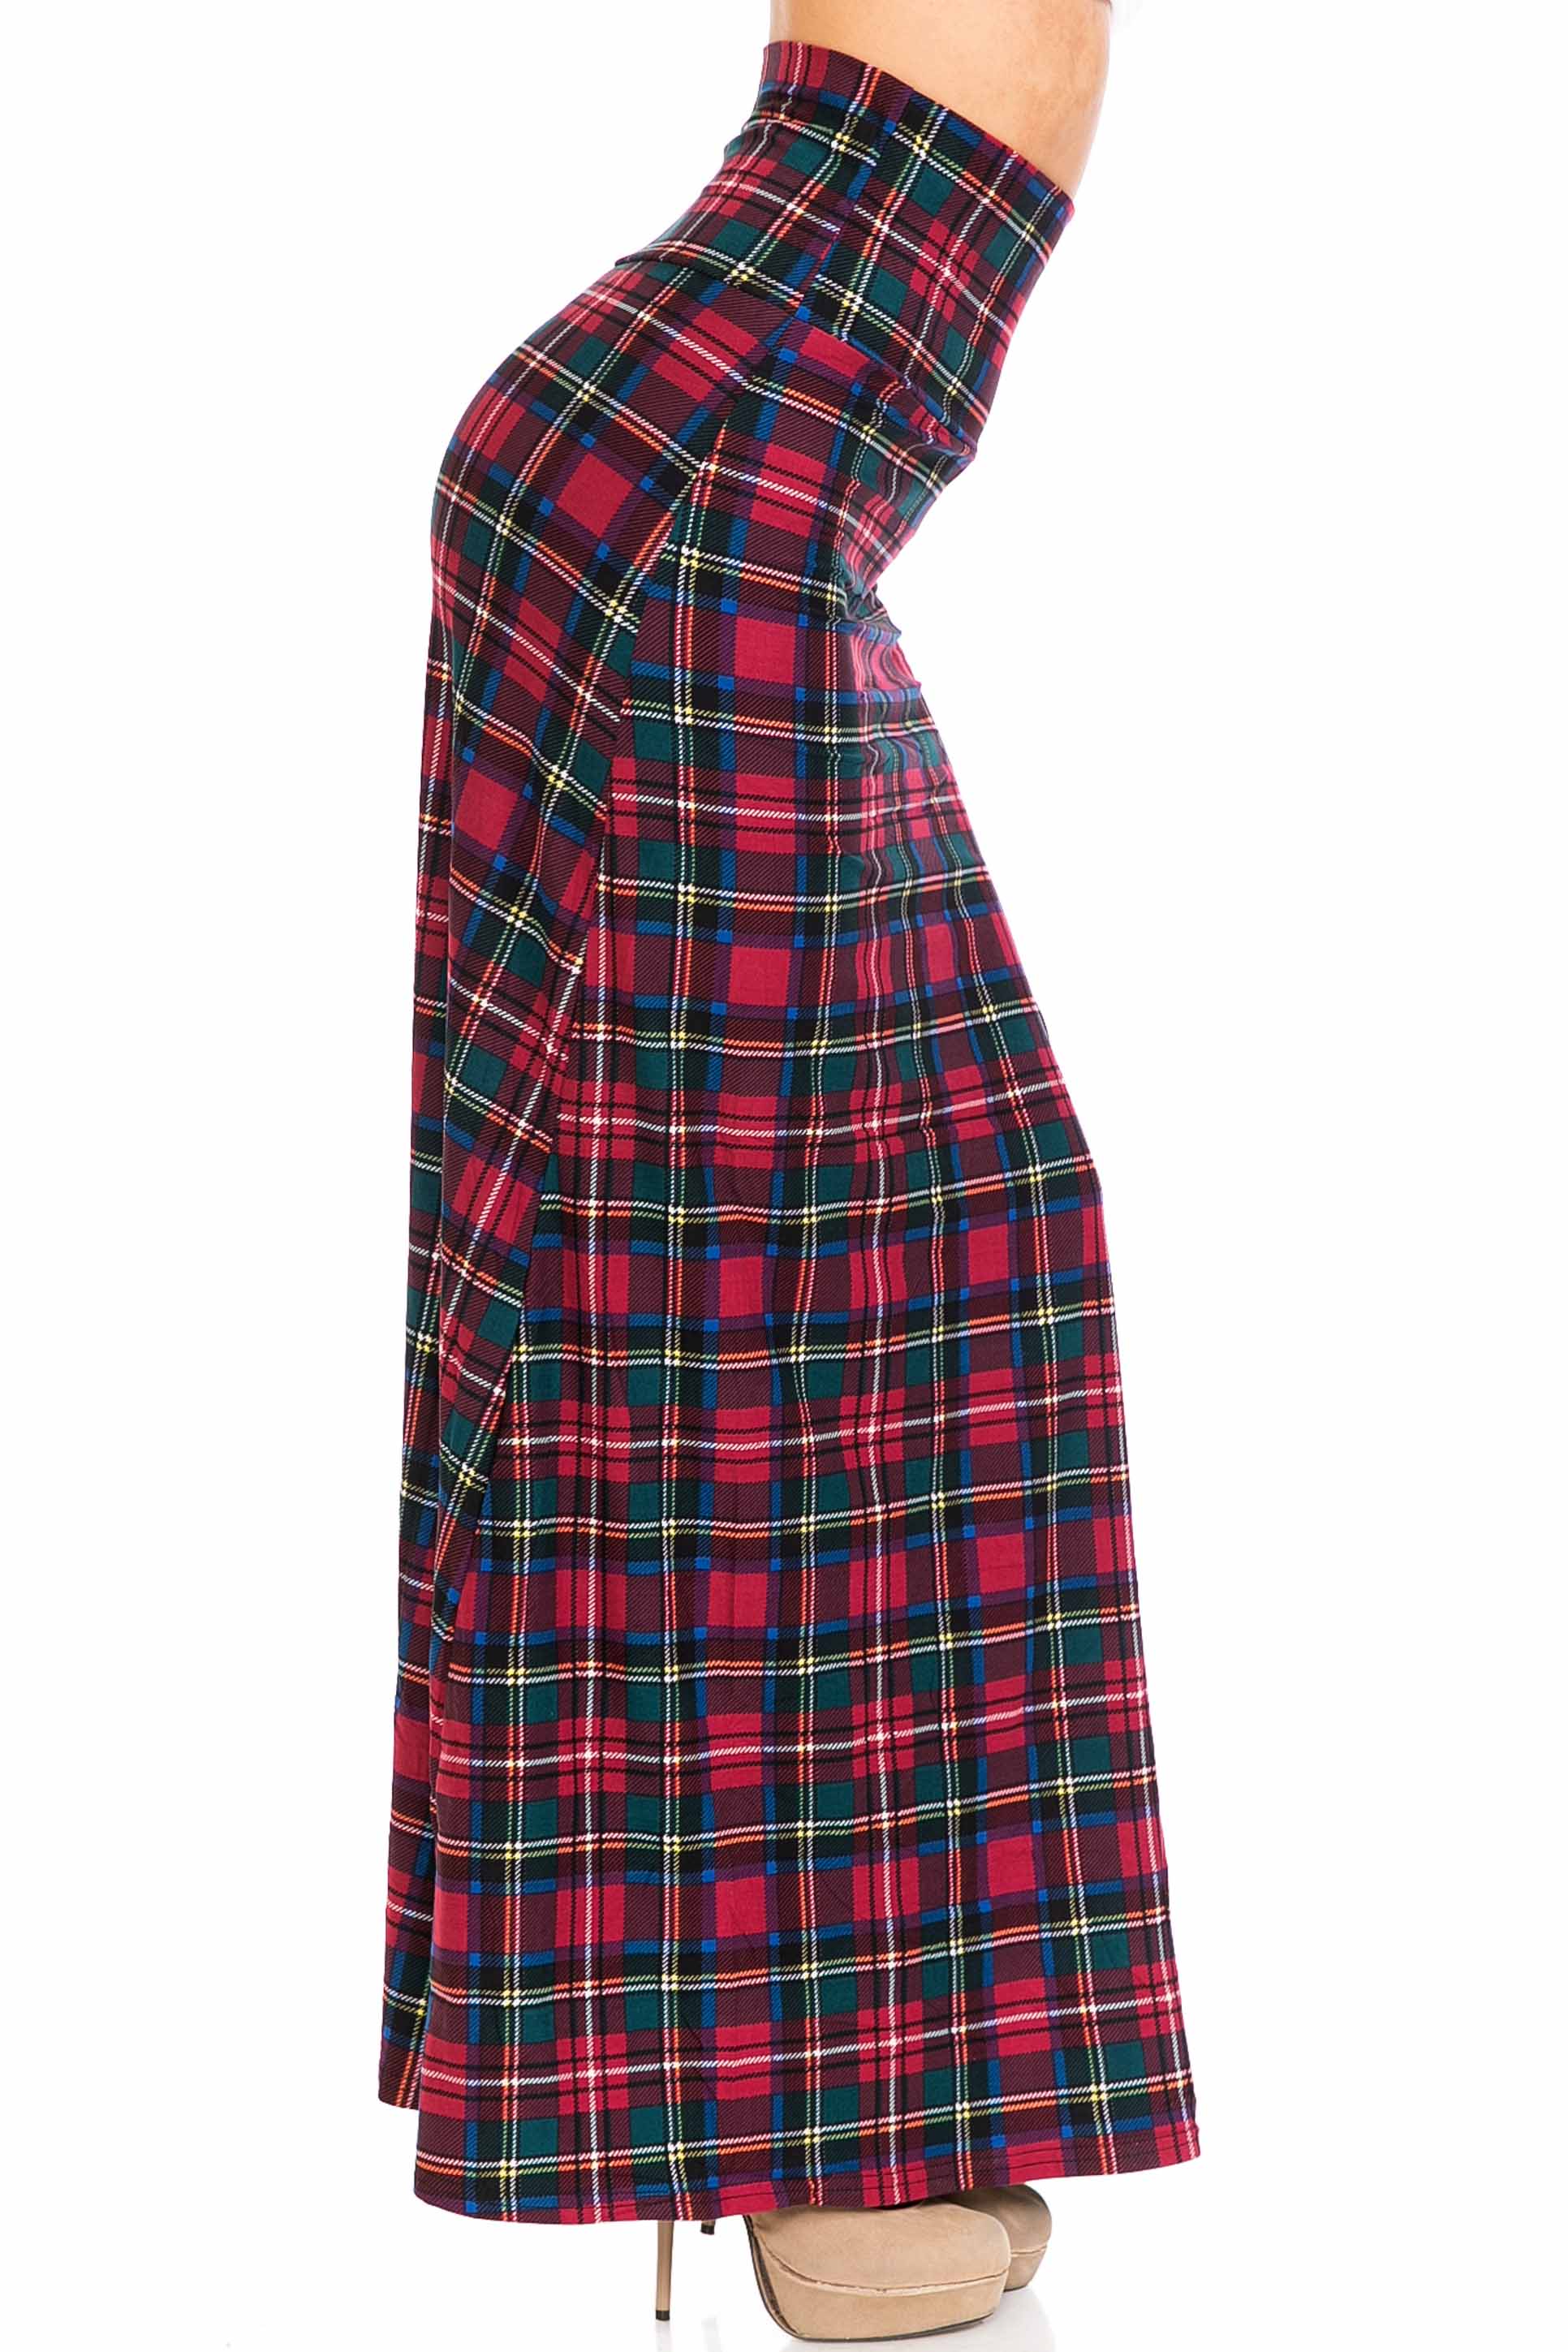 Wholesale Buttery Smooth Modish Plaid Maxi Skirt